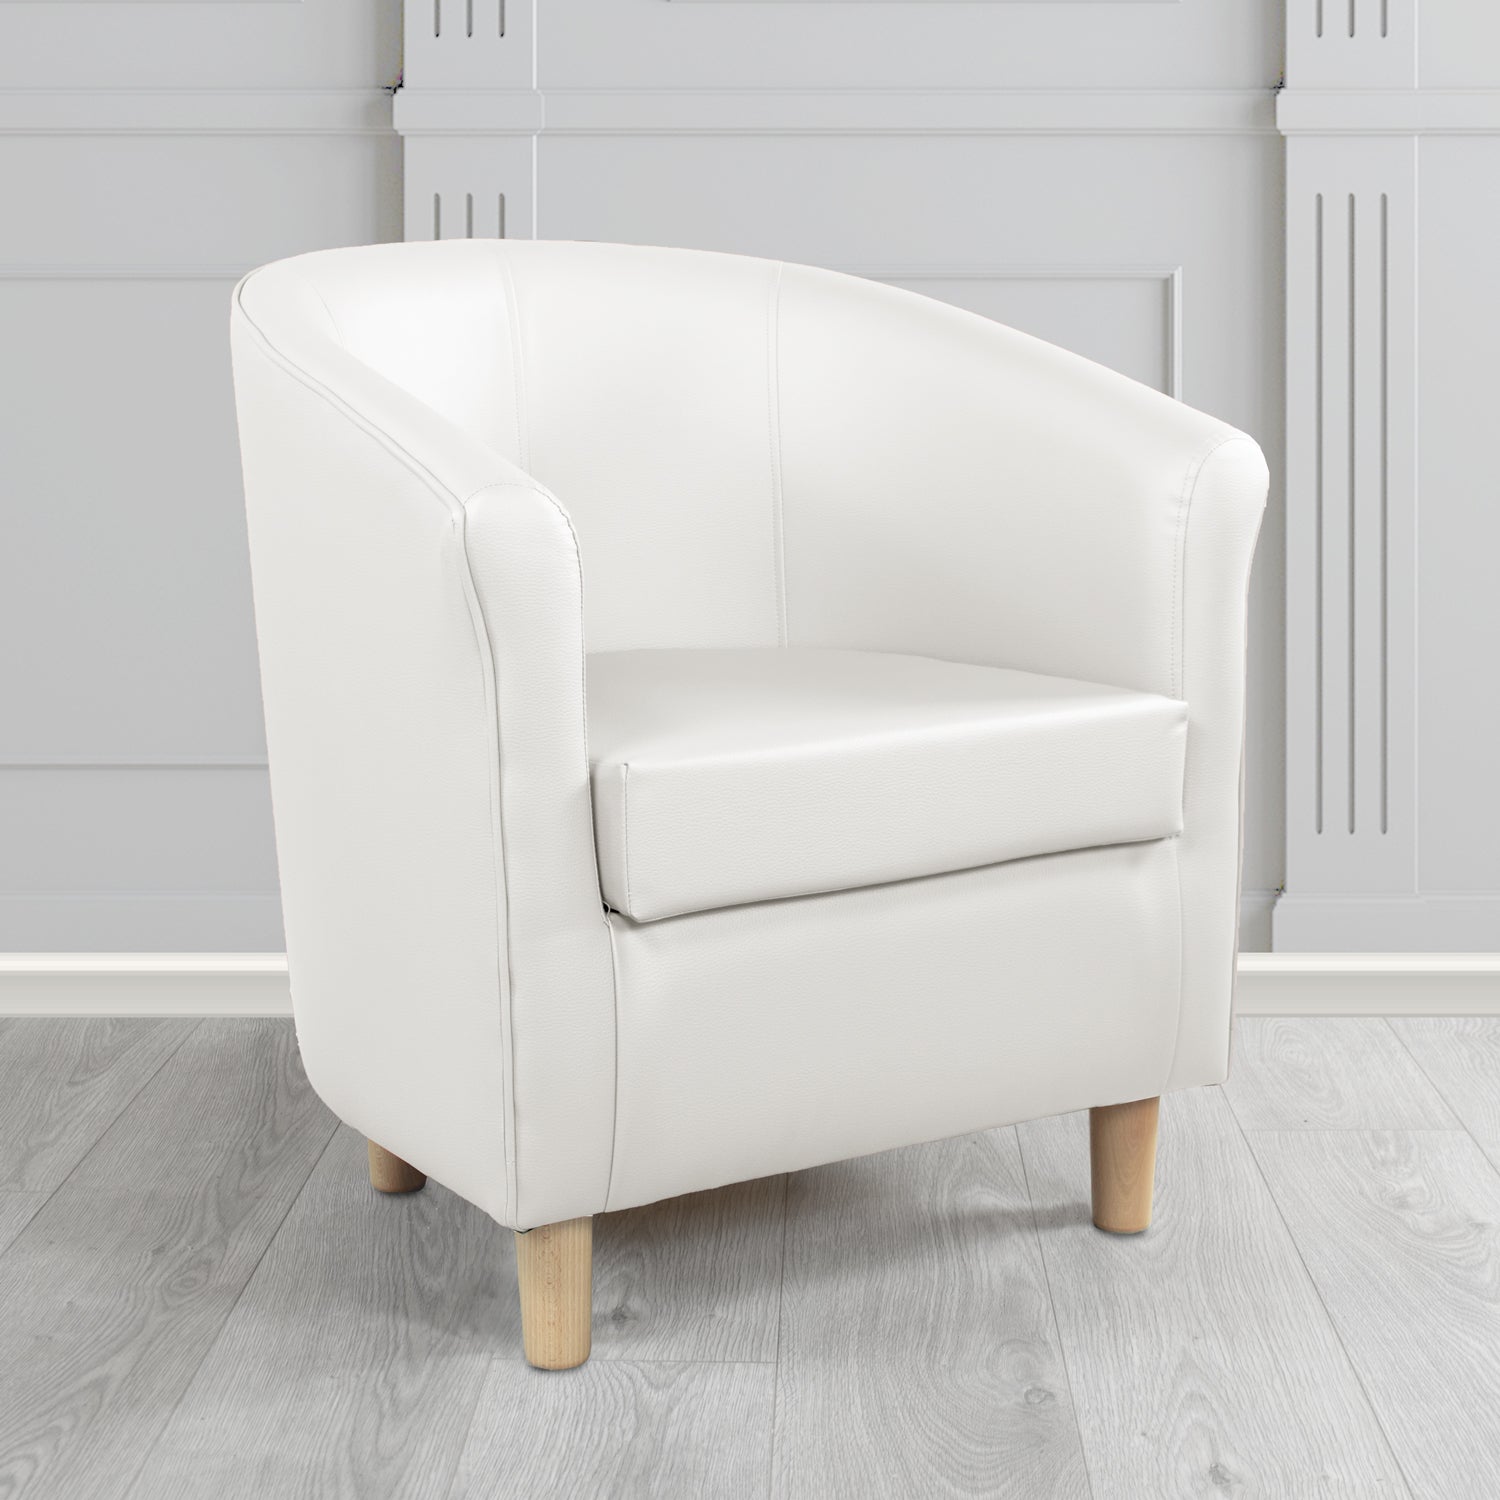 Tuscany Just Colour Jasmine White Antimicrobial Crib 5 Contract Faux Leather Tub Chair - The Tub Chair Shop